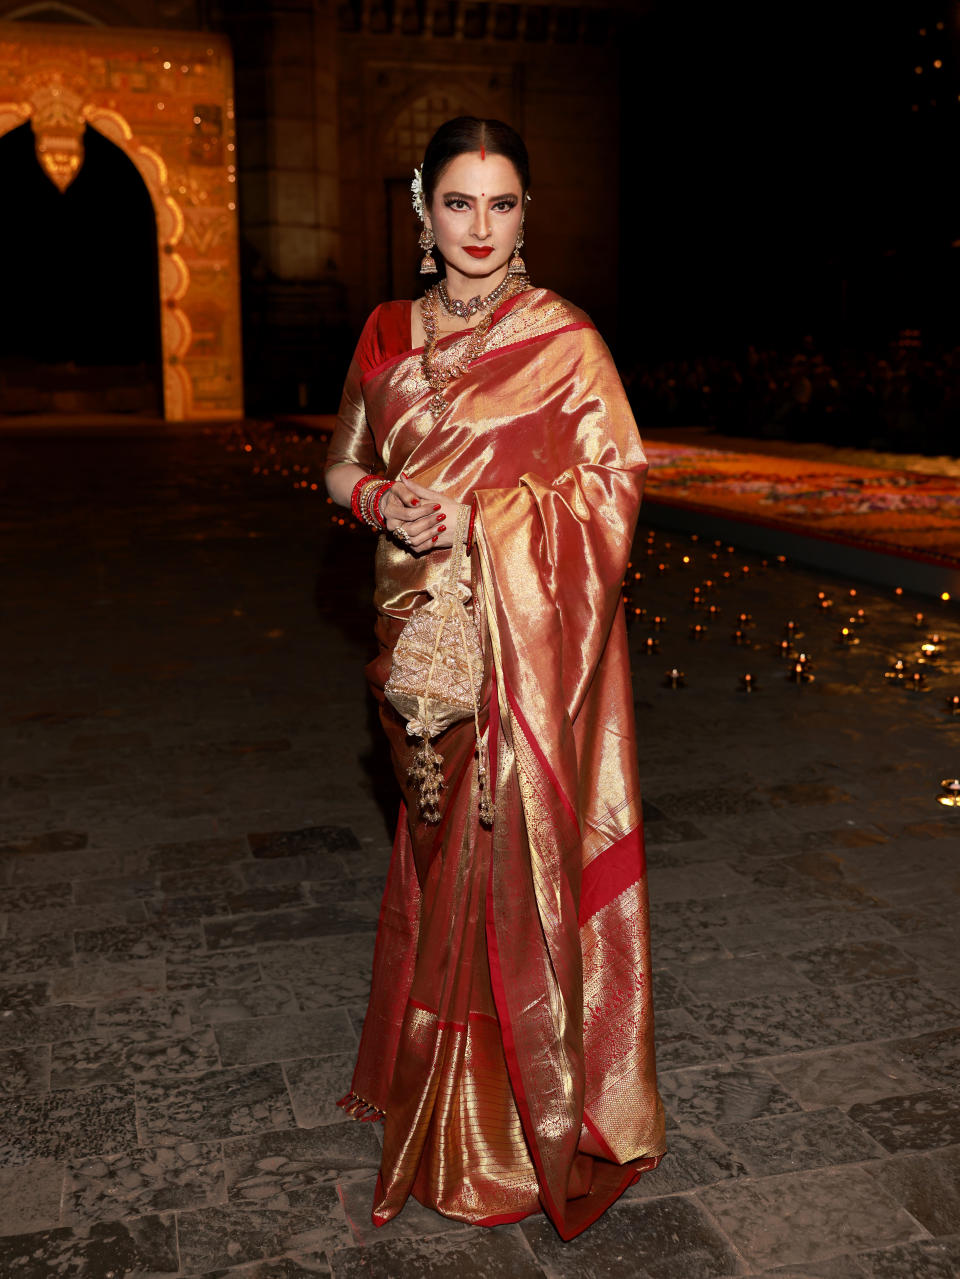 MUMBAI, INDIA - MARCH 30: Rekha attends the Christian Dior Womenswear Fall 2023 show at the Gateway of India monument on March 30, 2023 in Mumbai, India. (Photo by Arnold Jerocki/Getty Images for Christian Dior)